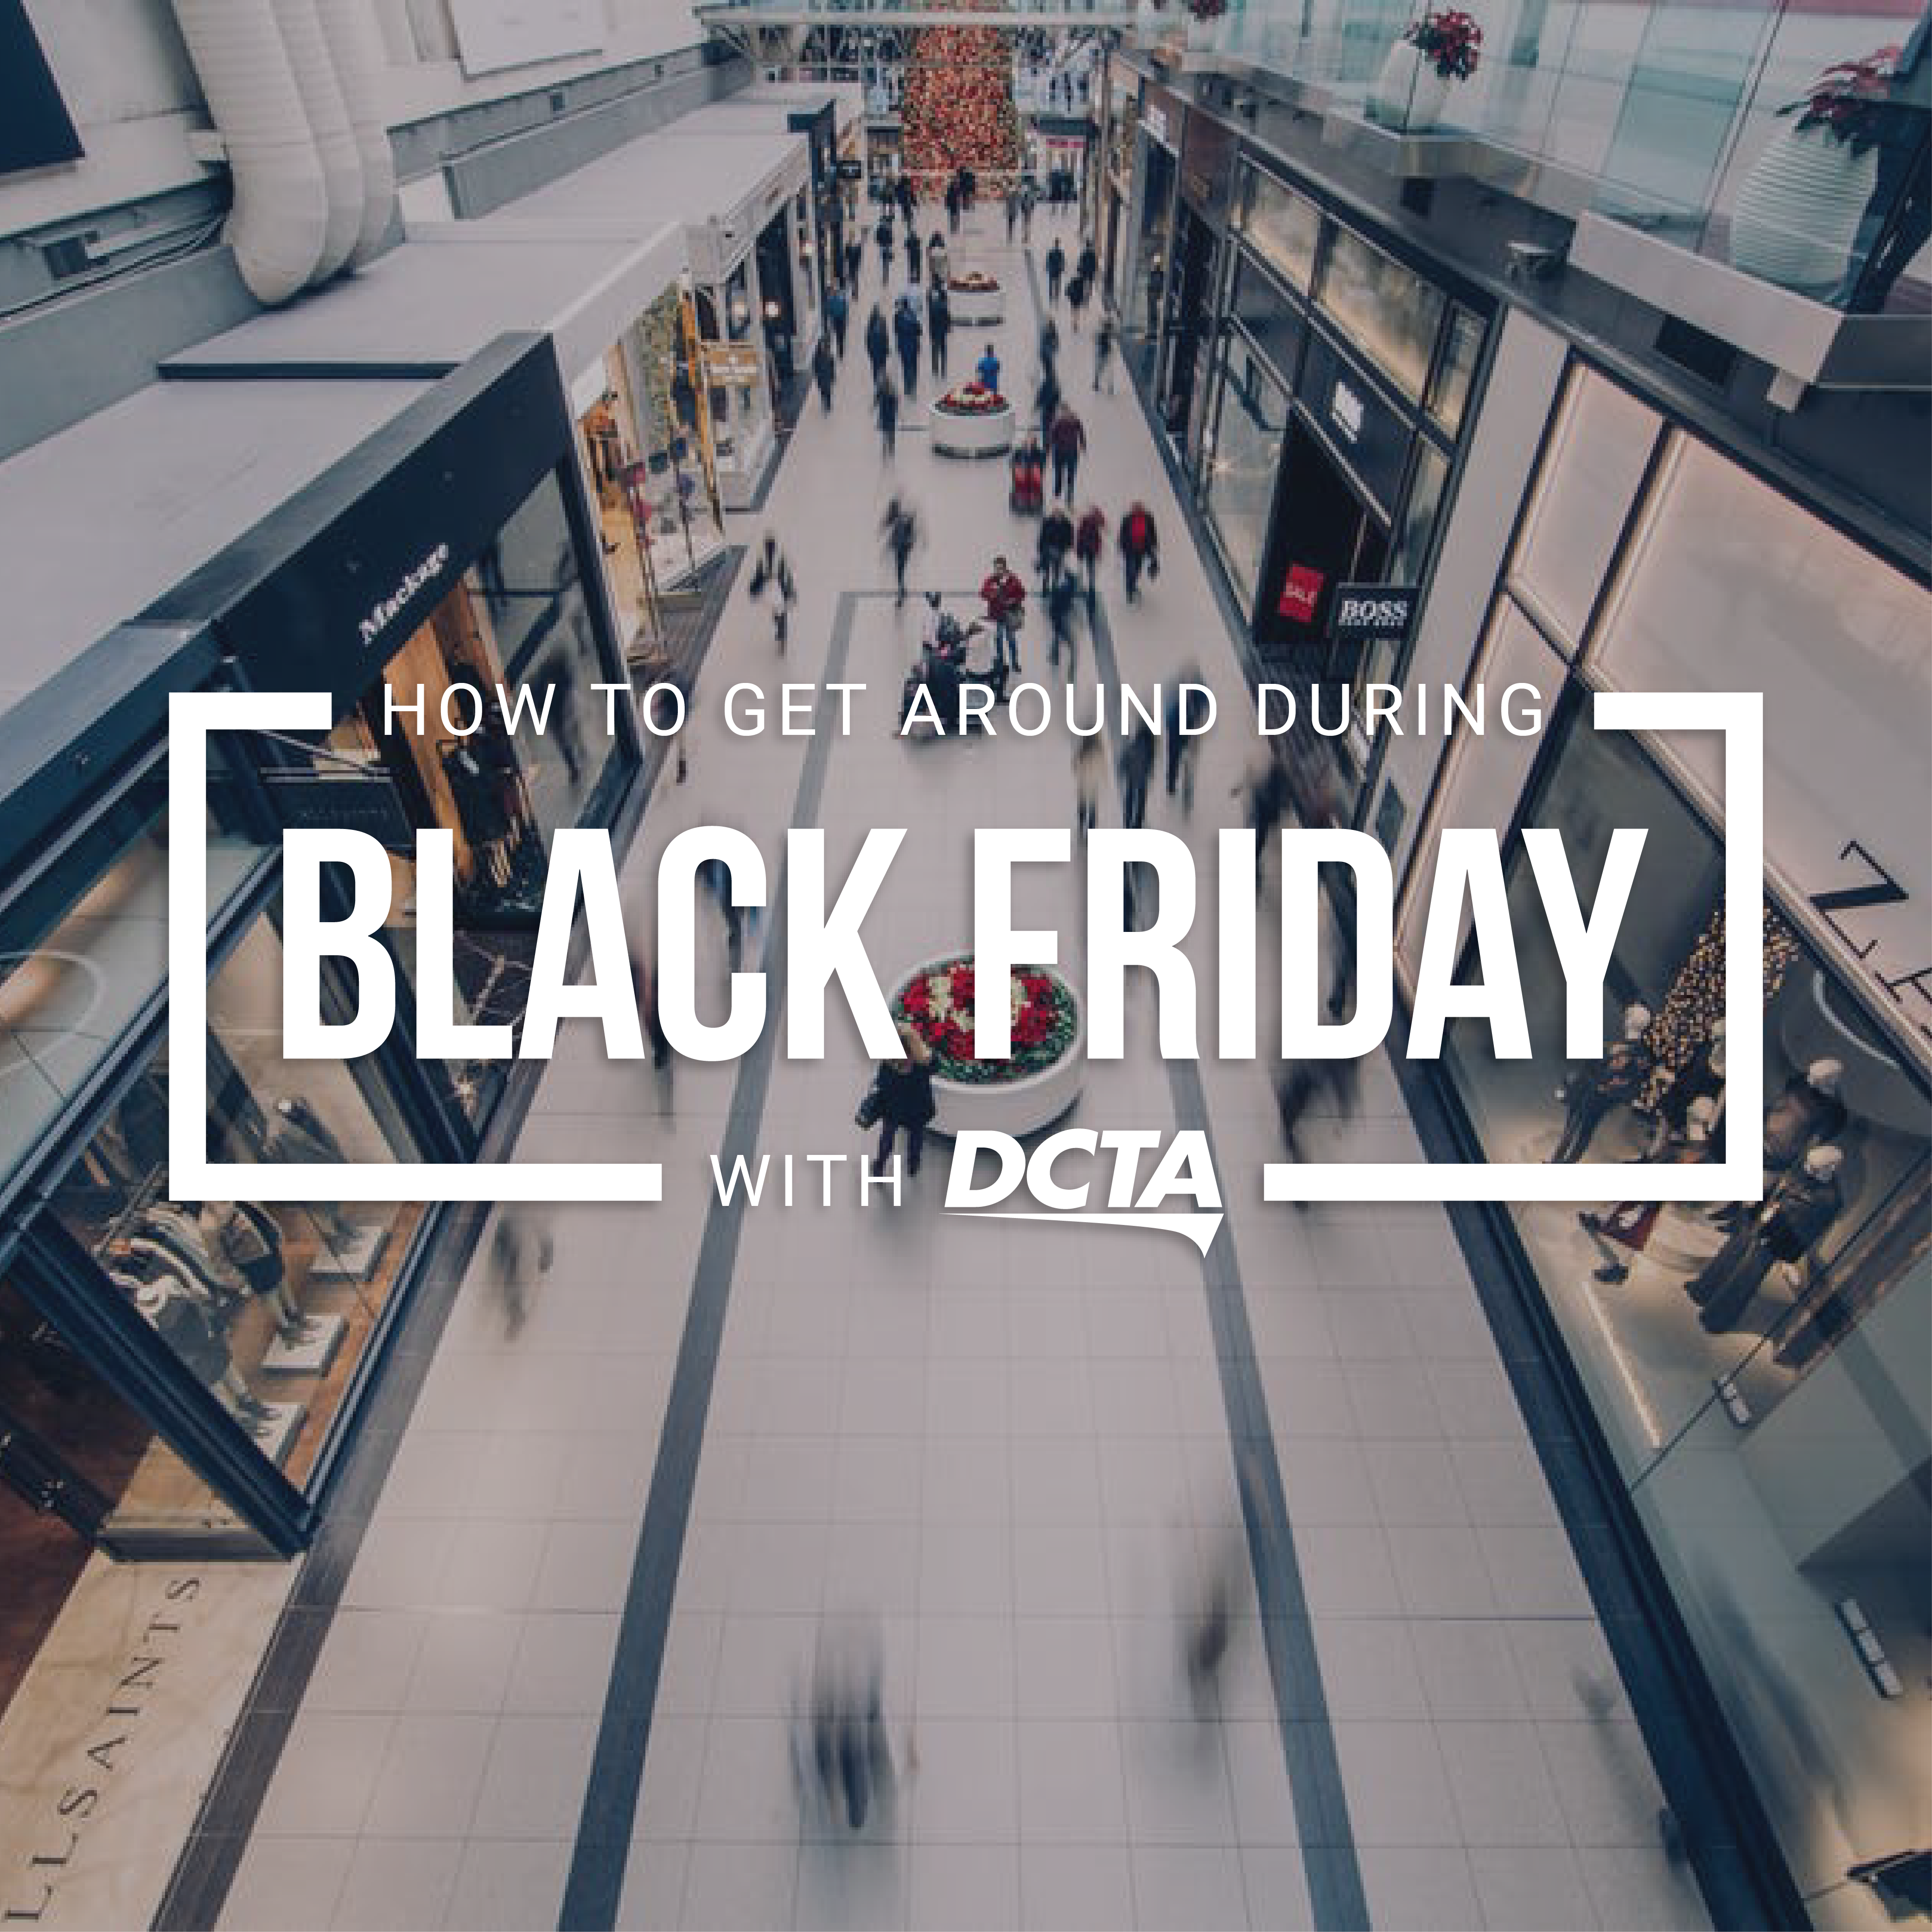 Ready for Black Friday? Hop a Ride on DCTA!